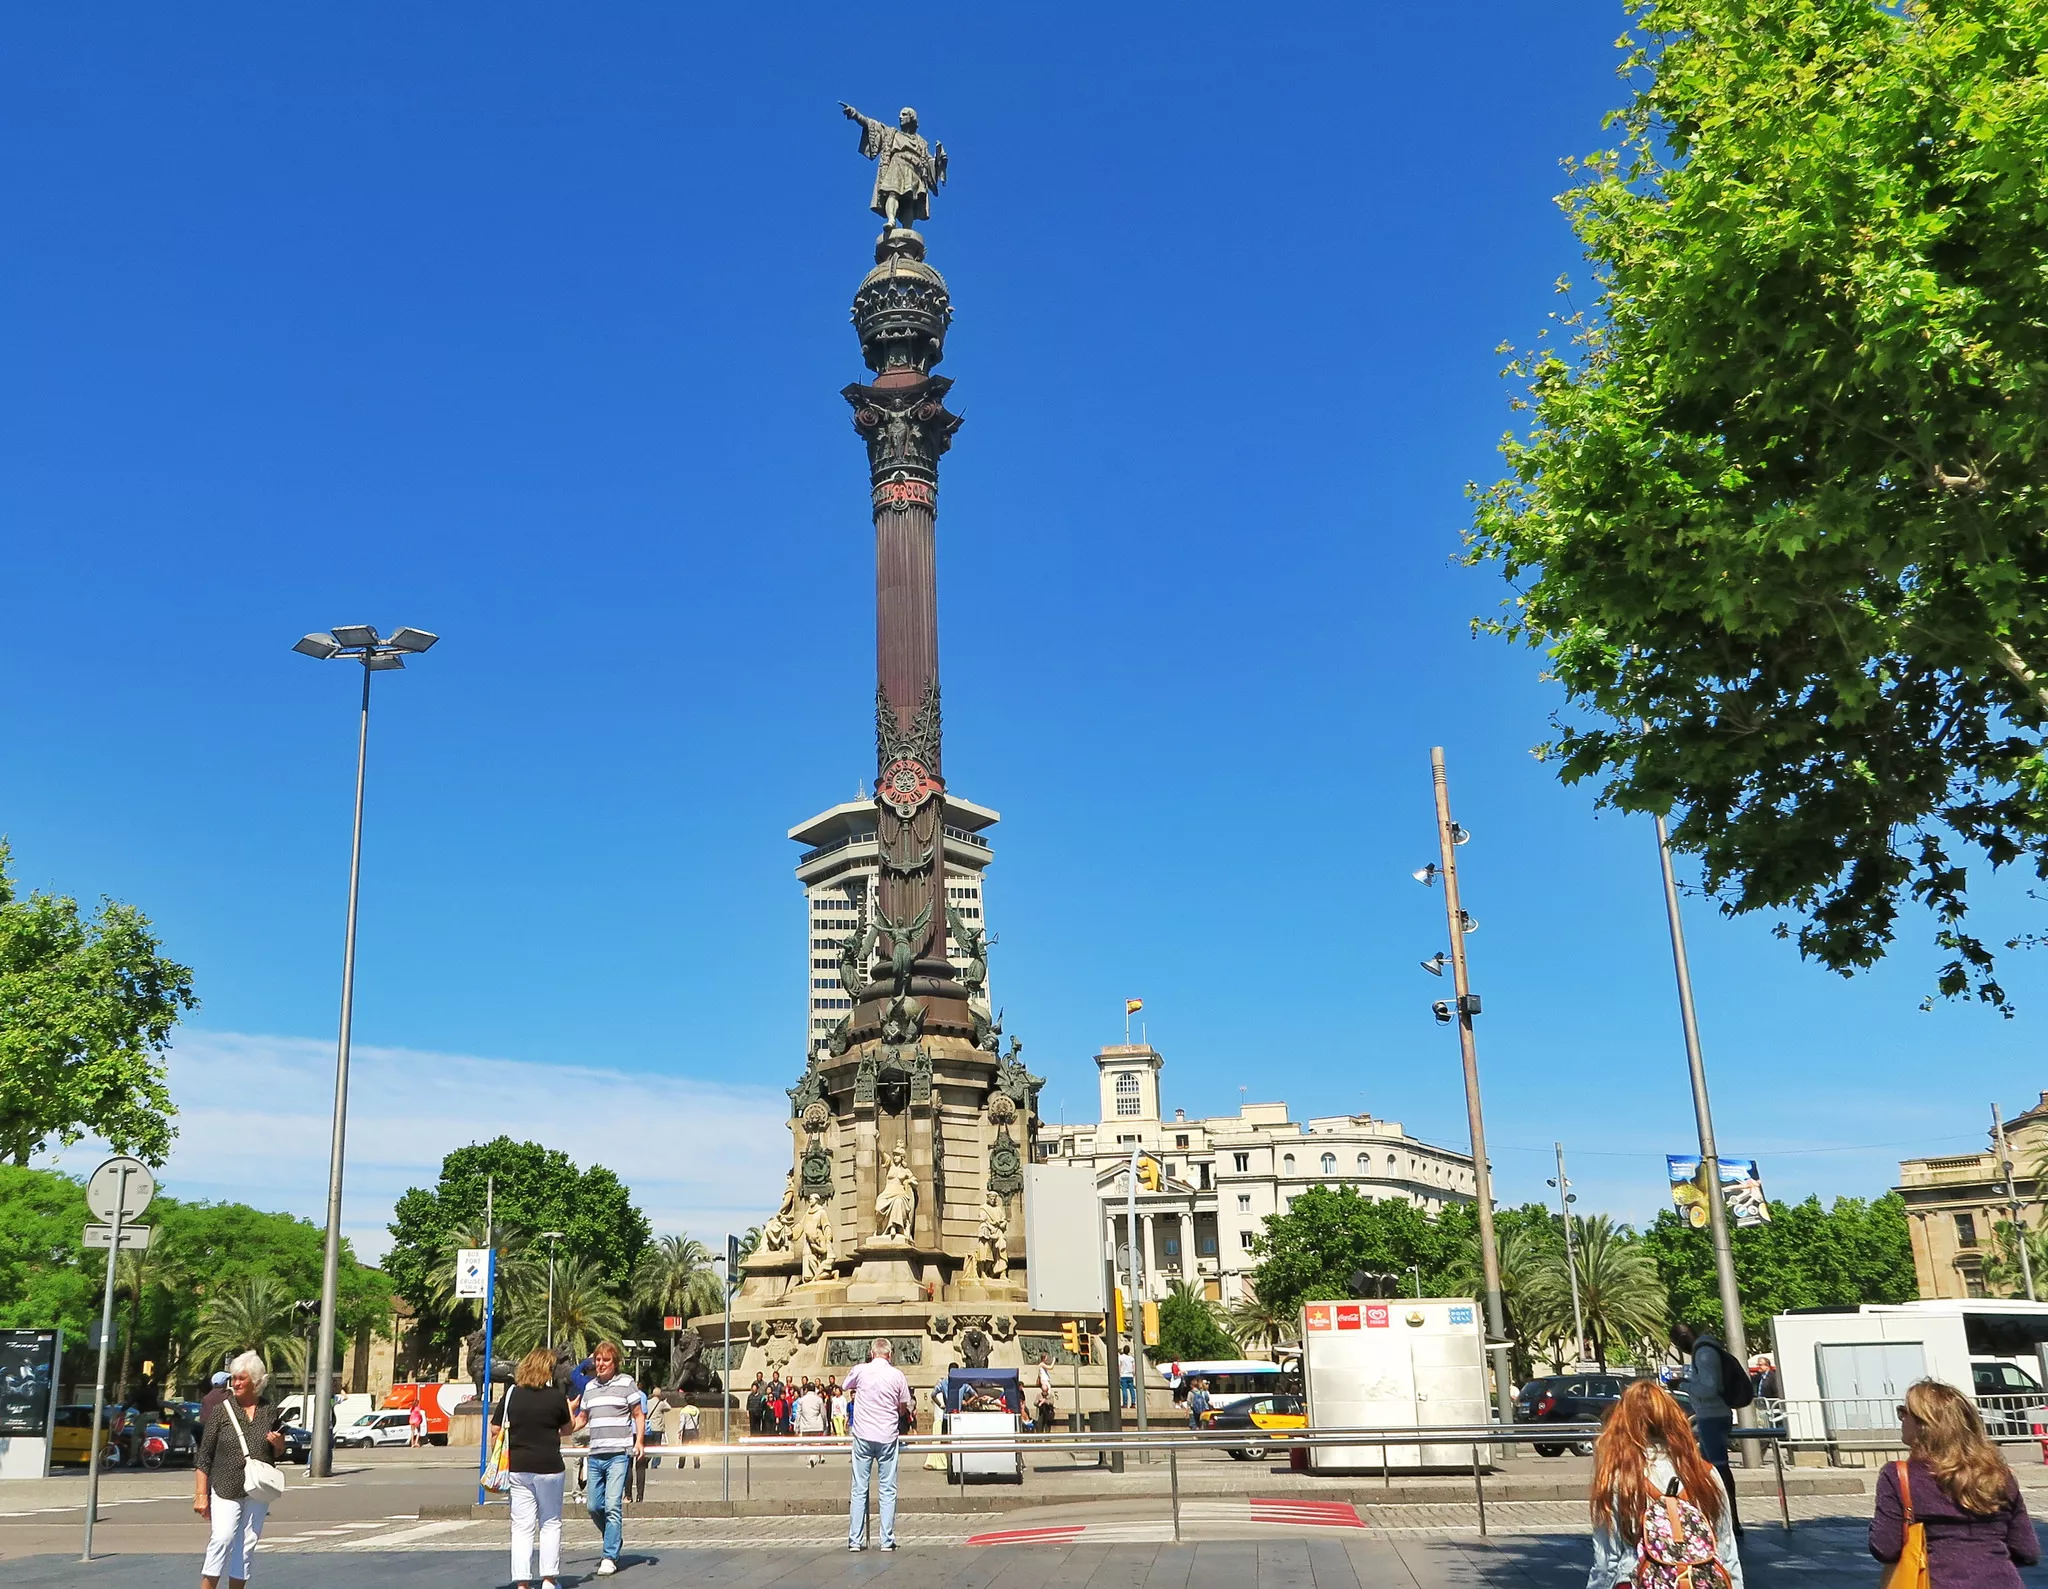 Columbus Monument in Spain, Europe | Monuments - Rated 5.8